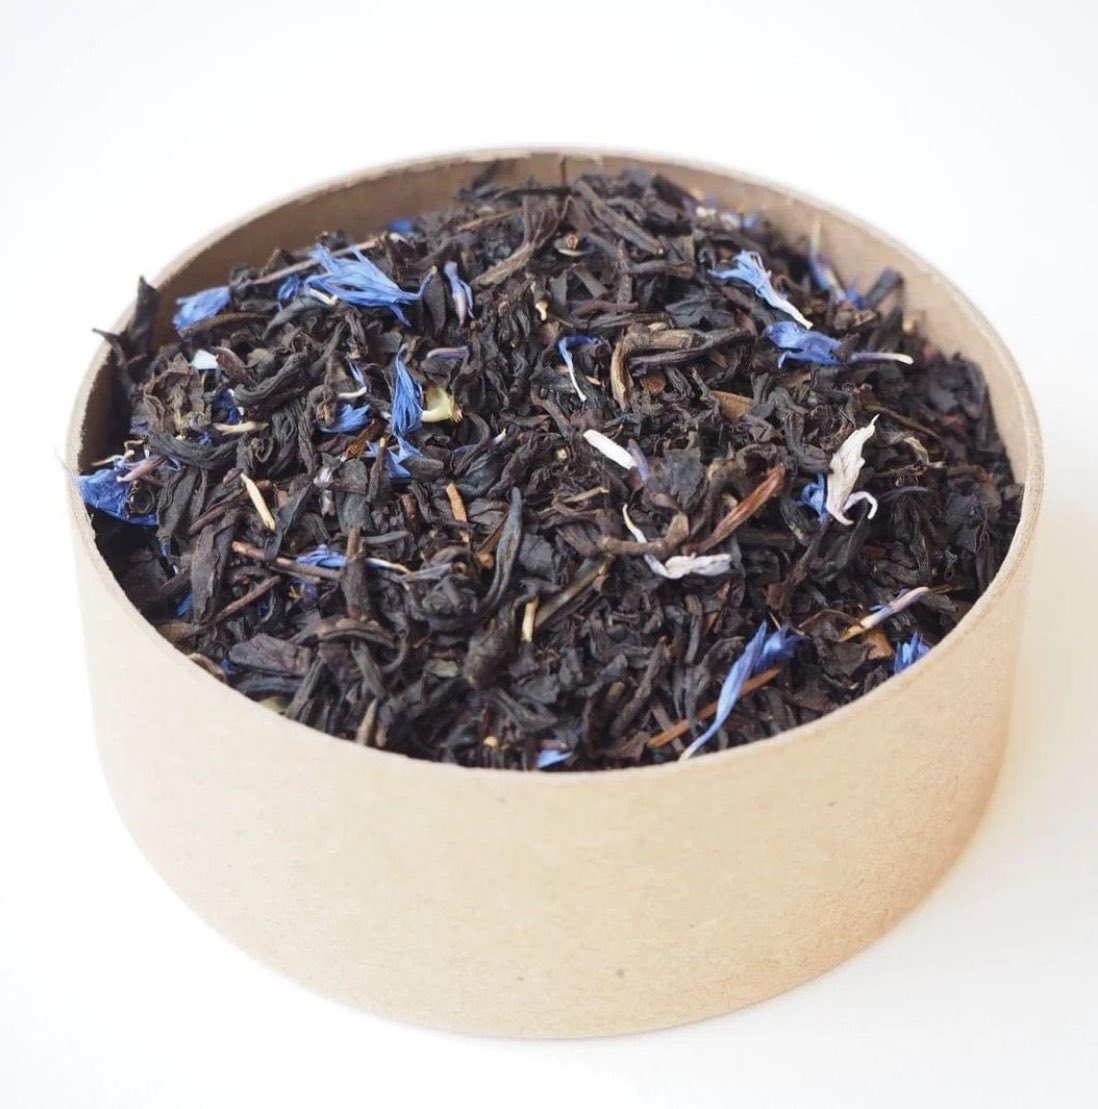 Arctic Fire 🔥 tea is a bit of a contradiction so let me explain!
The hot (fire) from the tropical flavours of papaya and mango and the cold (arctic) the minty aftertaste 🥶

#tea #looseleaftea #flavouredtea #tealover #teatime #teapot #elevenseshour